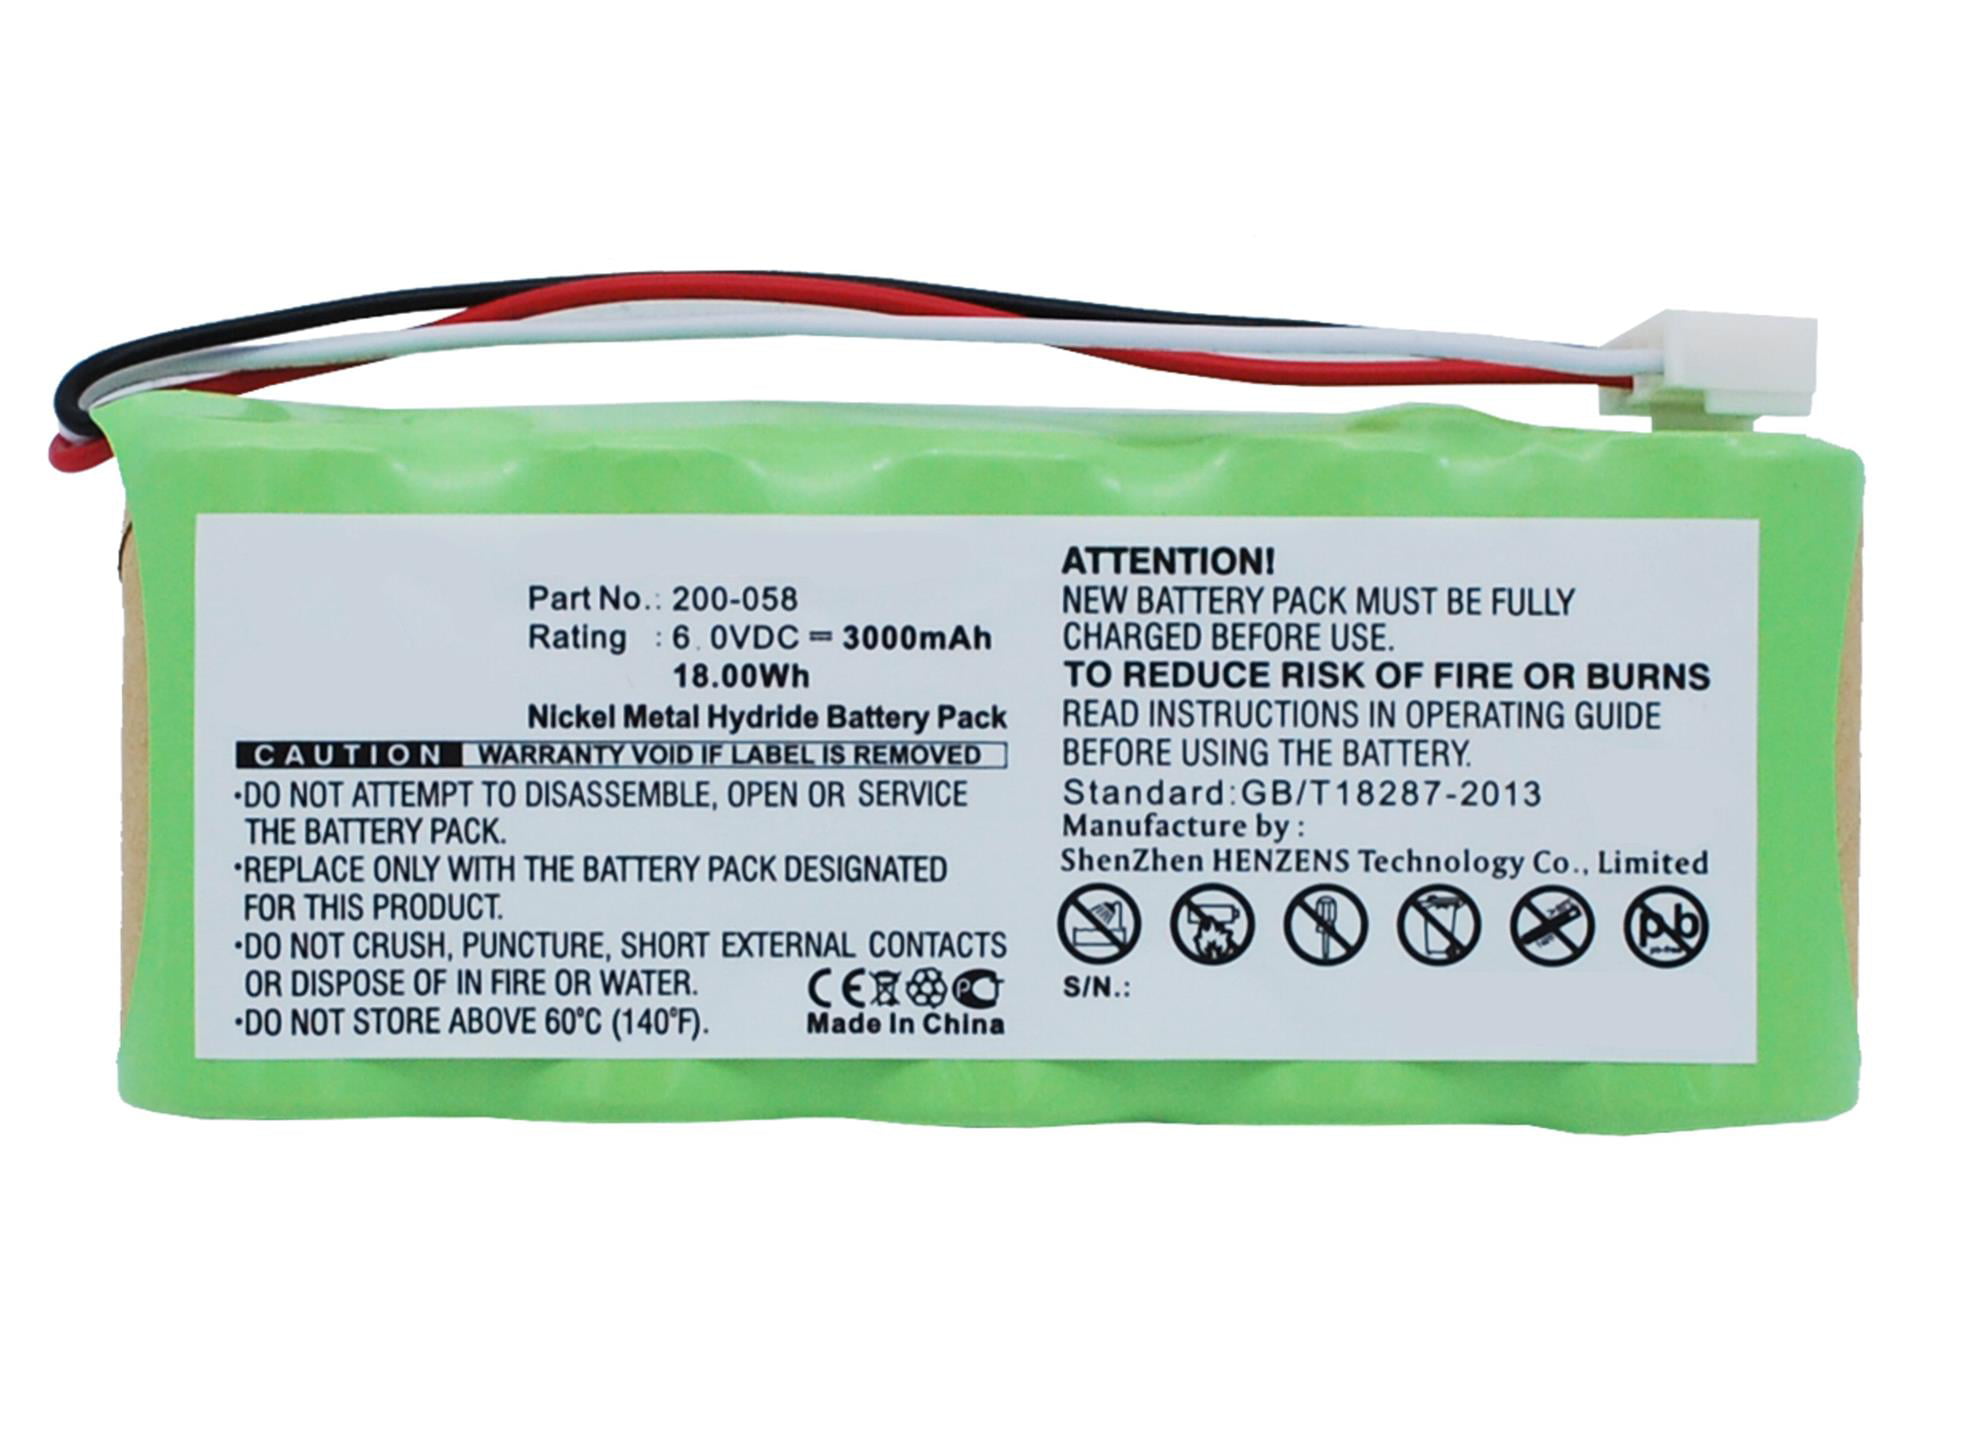 Clulite Unisex's 4.8v 2200m/a NiMH Battery Rechargeable Green 